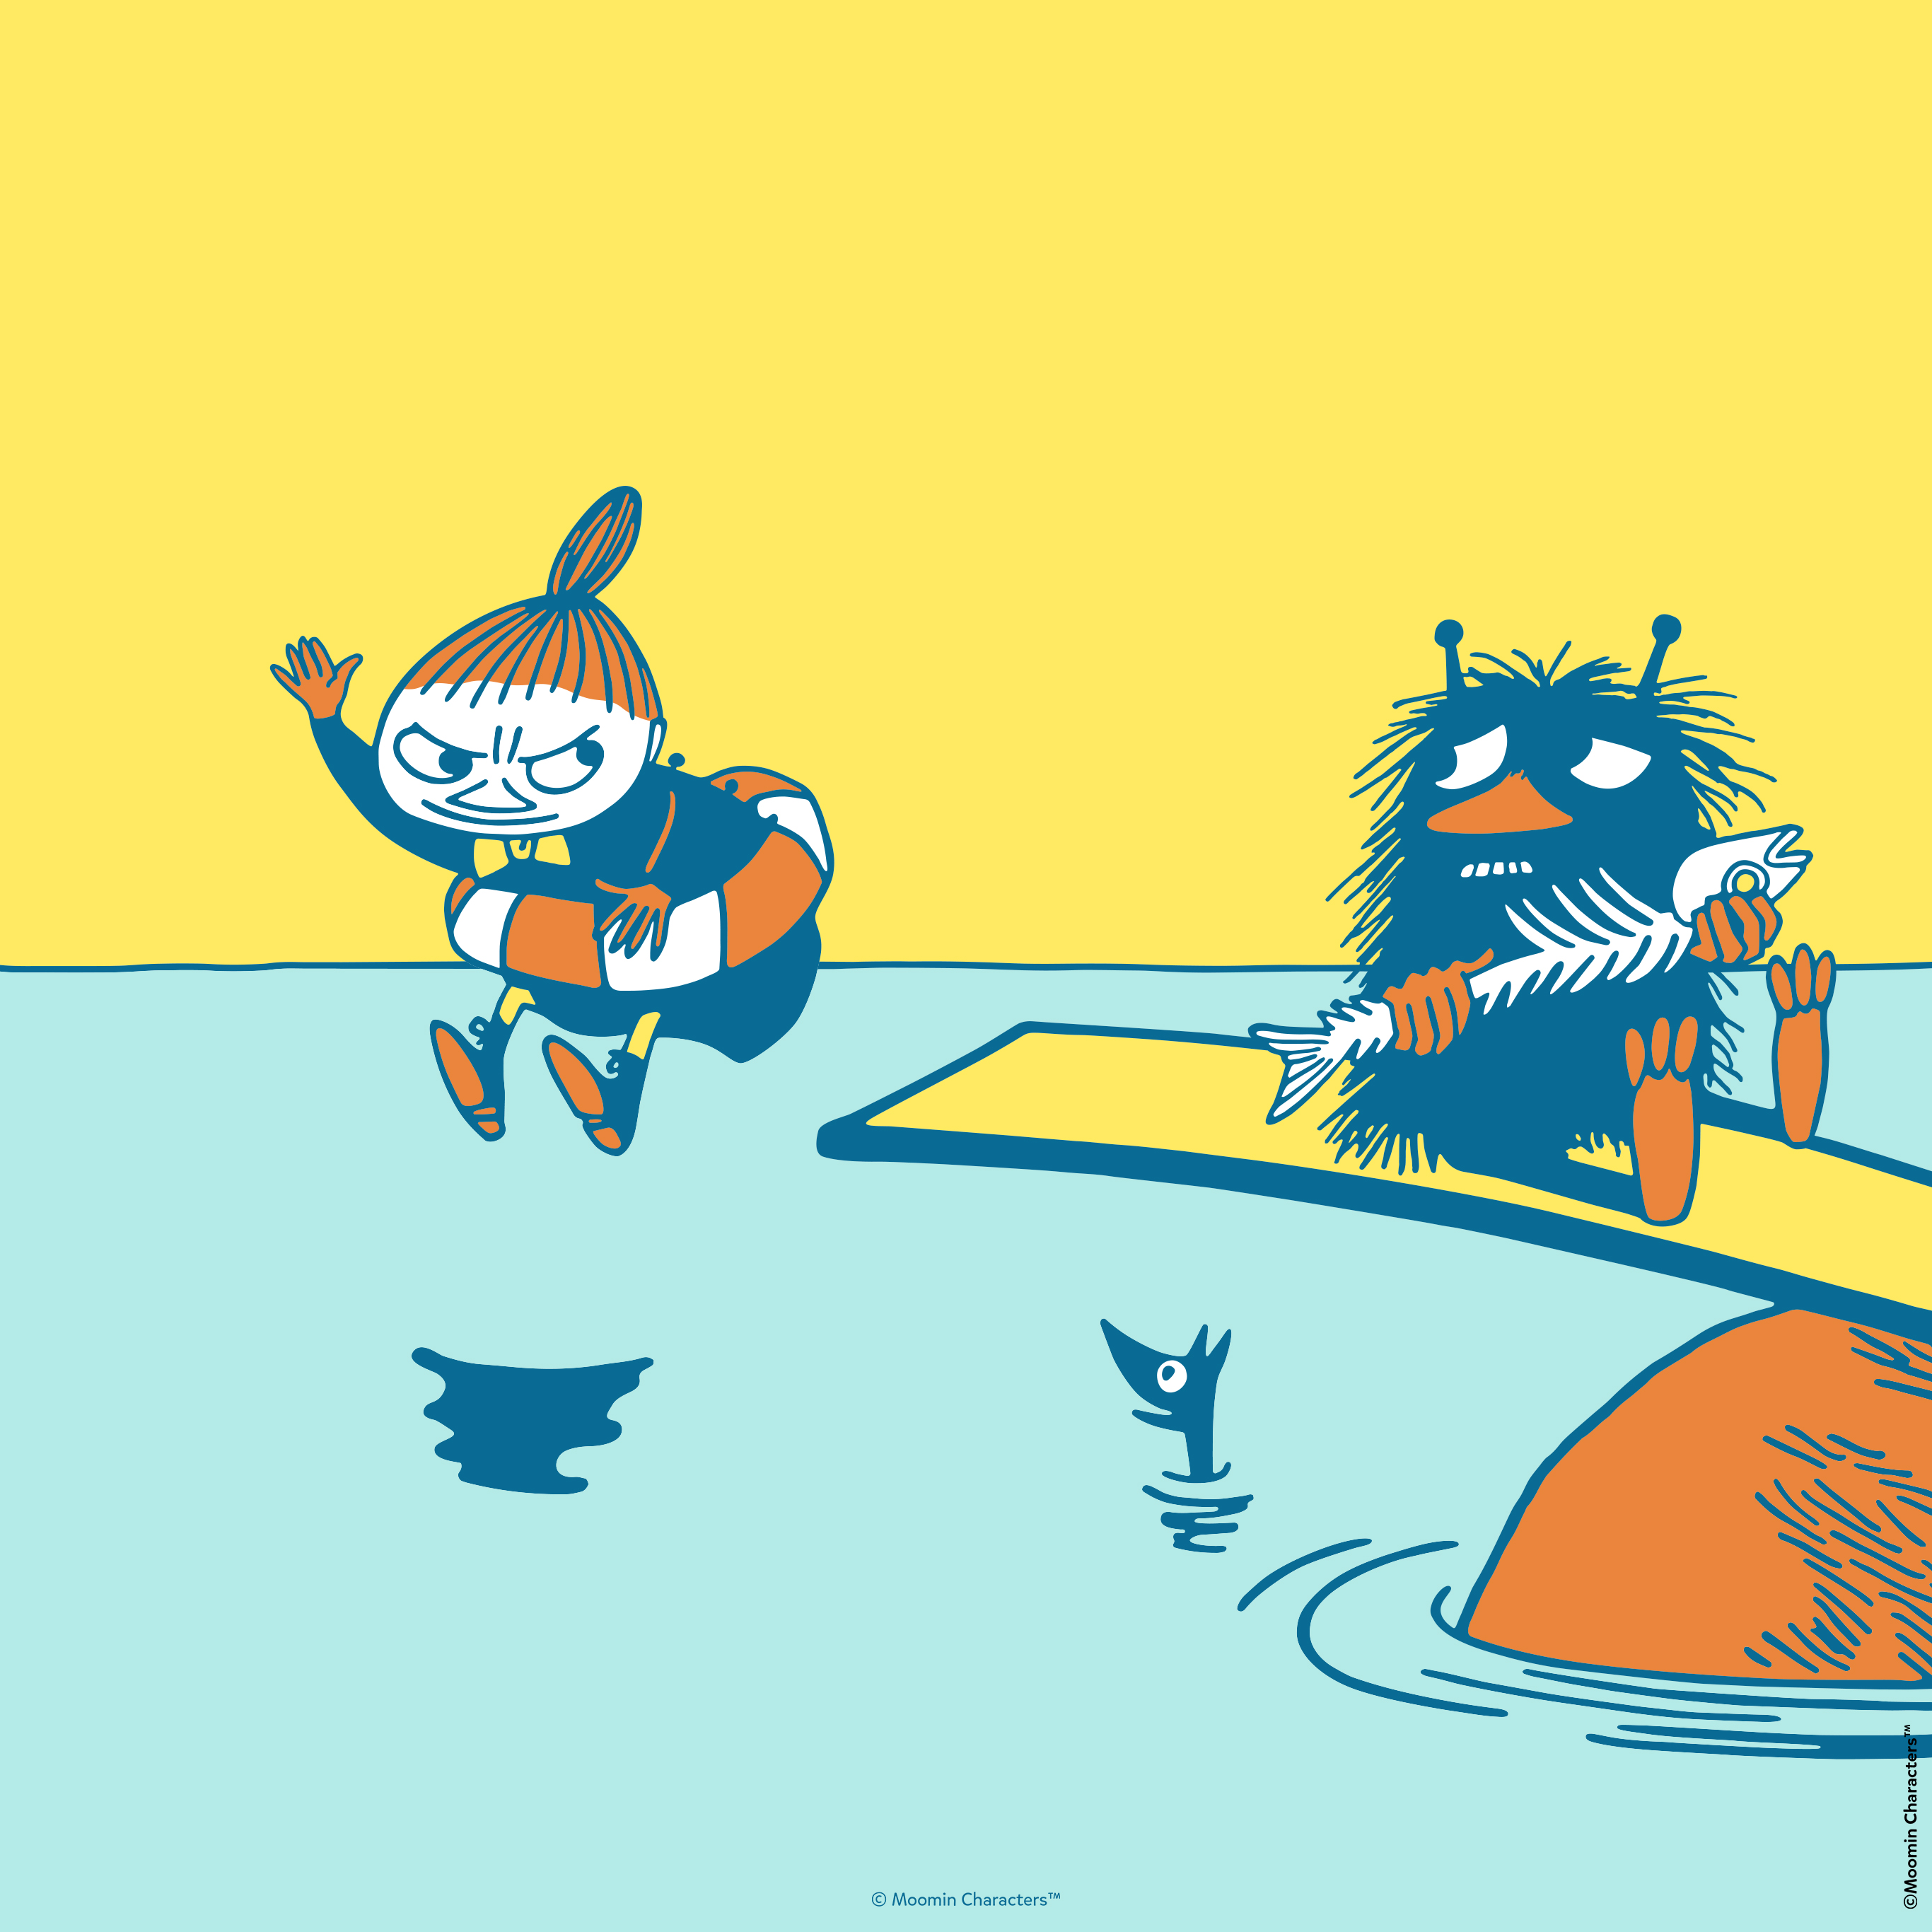 Show your support for #OURSEA with free Moomin wallpapers